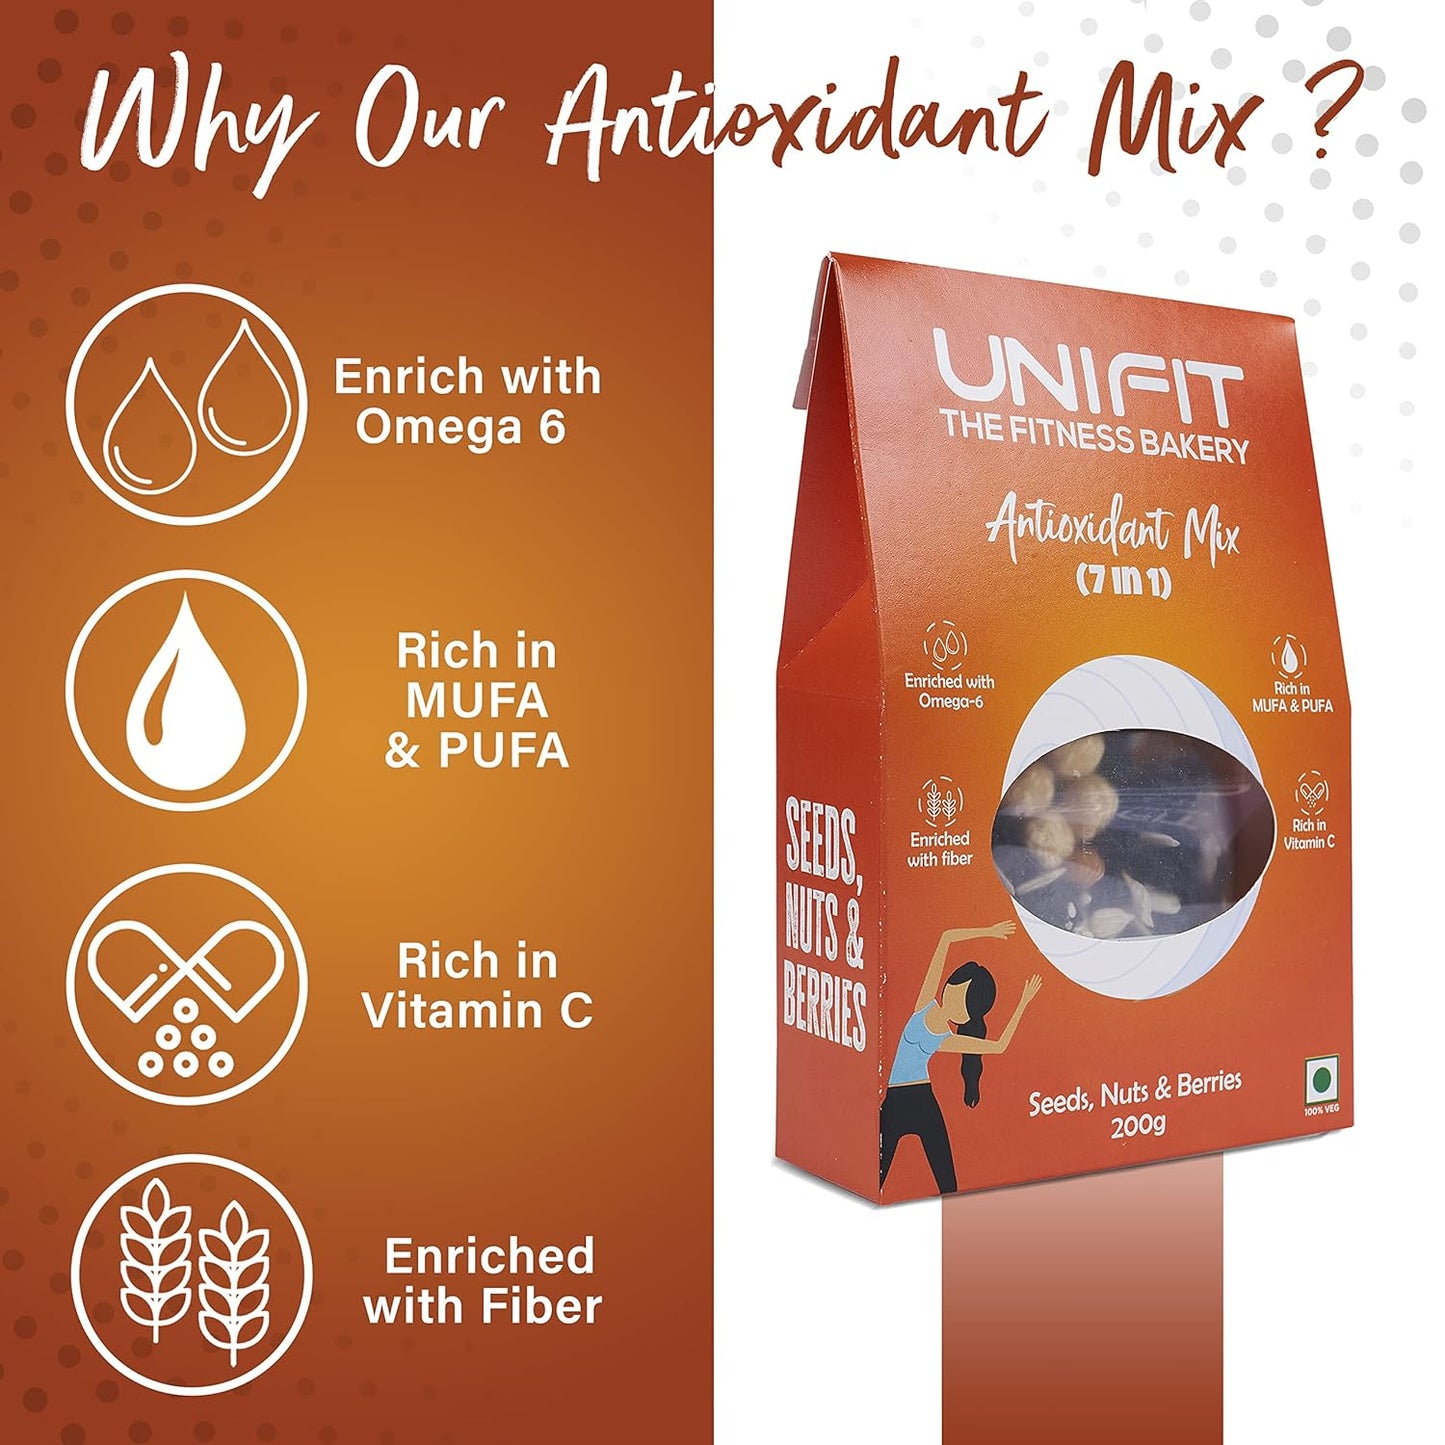 UNIFIT 7 in 1 Antioxidant Mix